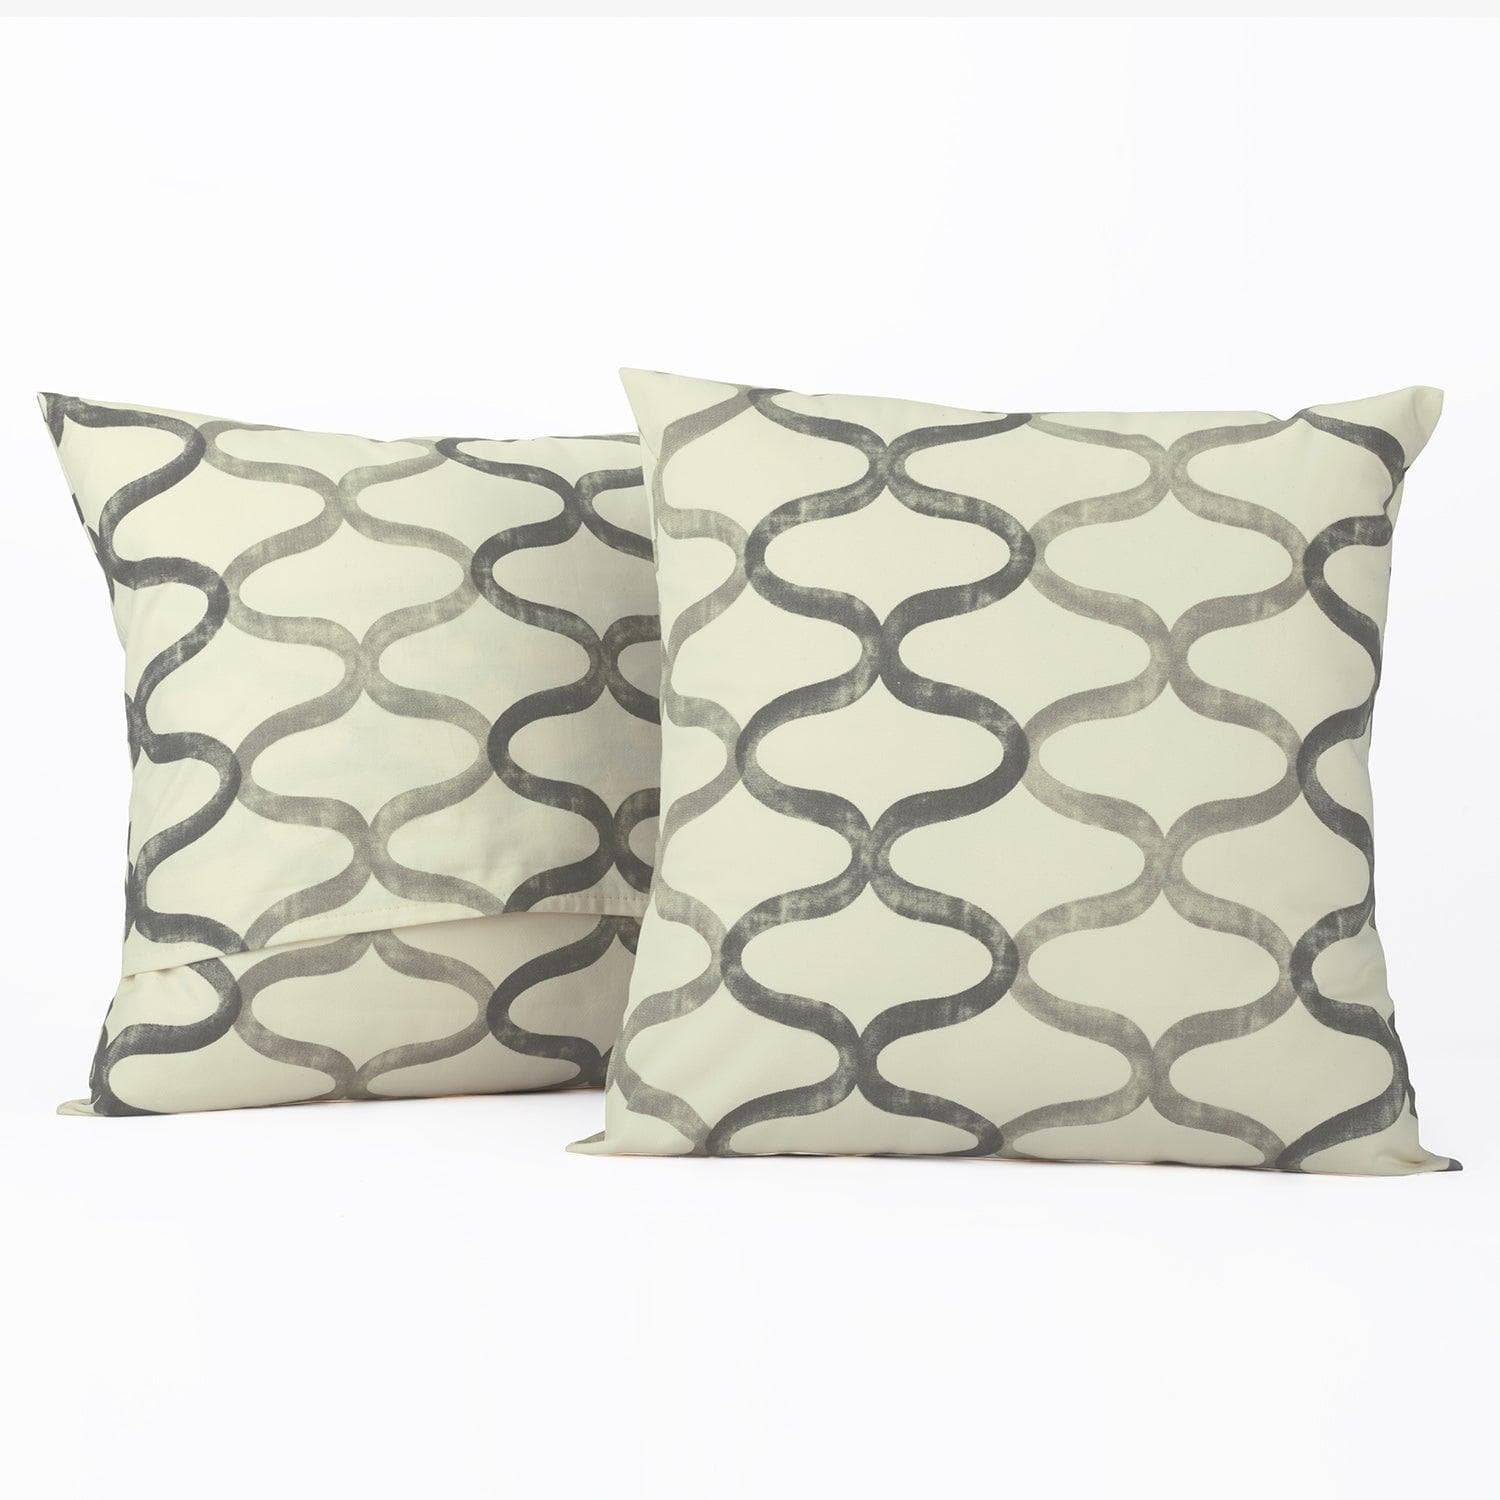 Illusions Silver Grey Printed Cotton Cushion Covers - Pair